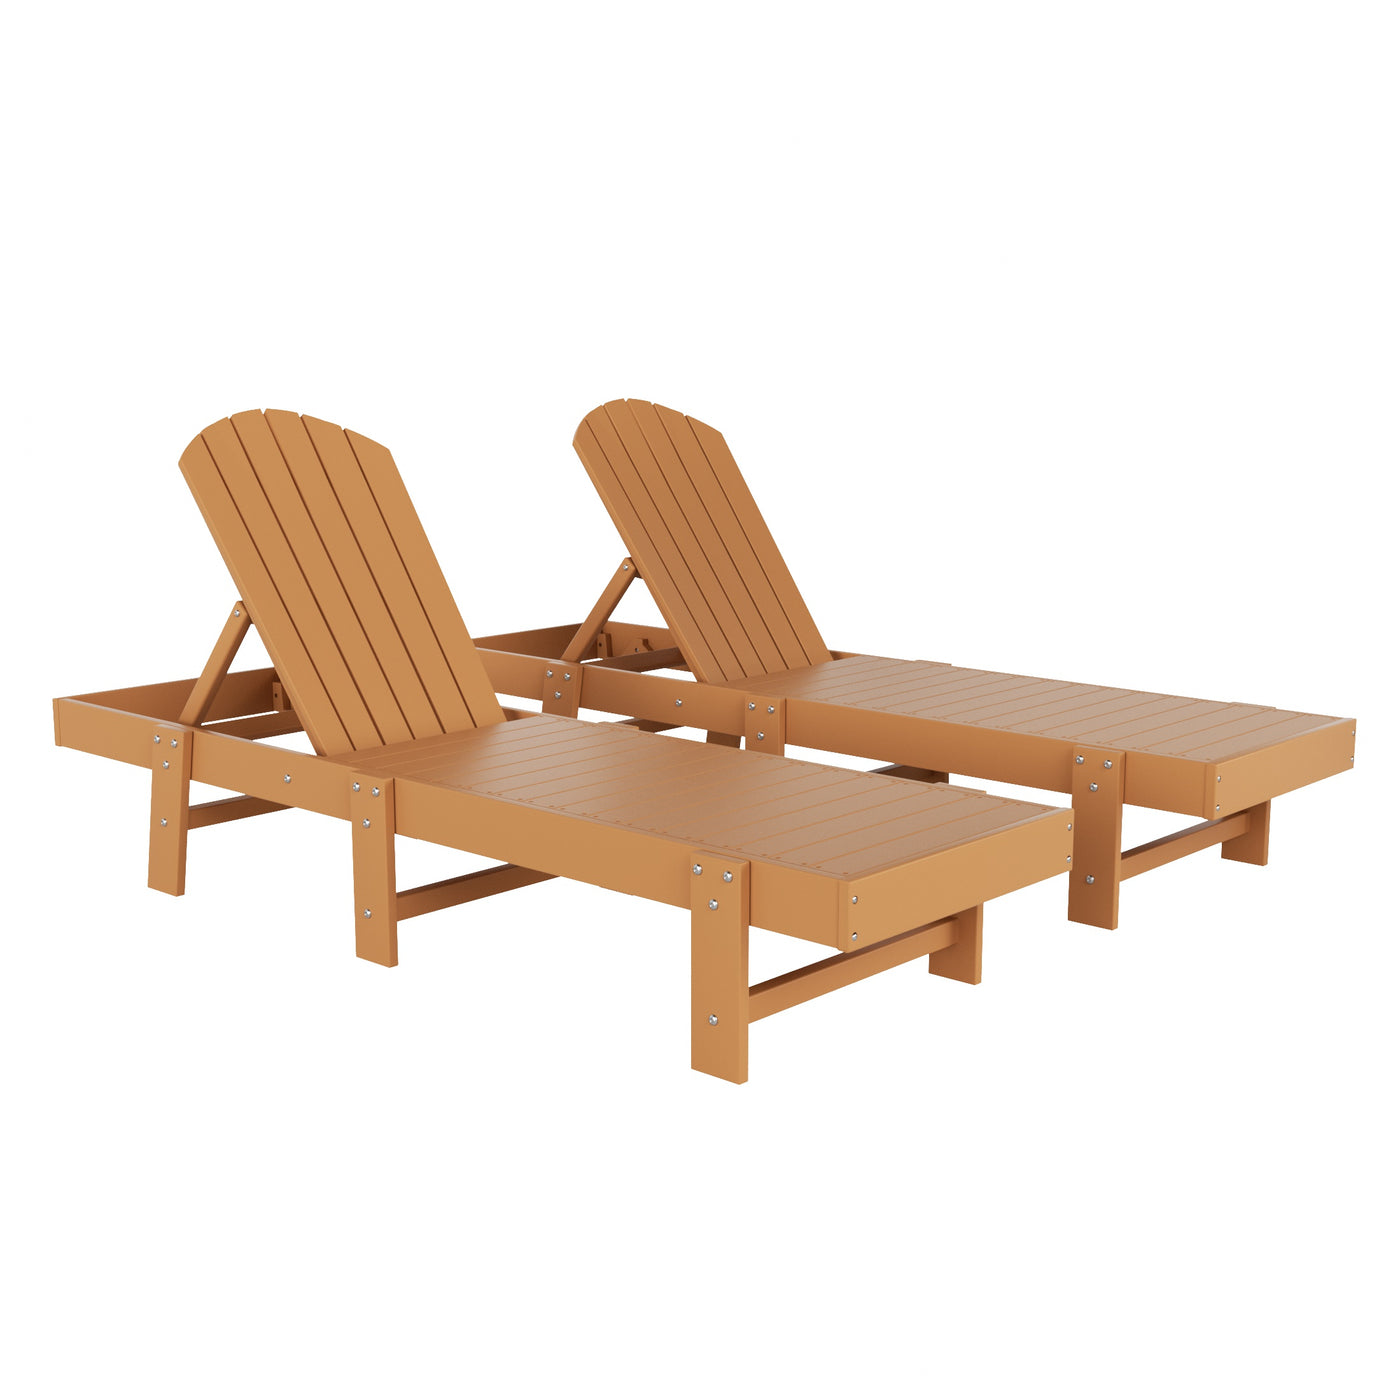 Dylan Classic Adirondack Poly Reclining Chaise Lounge